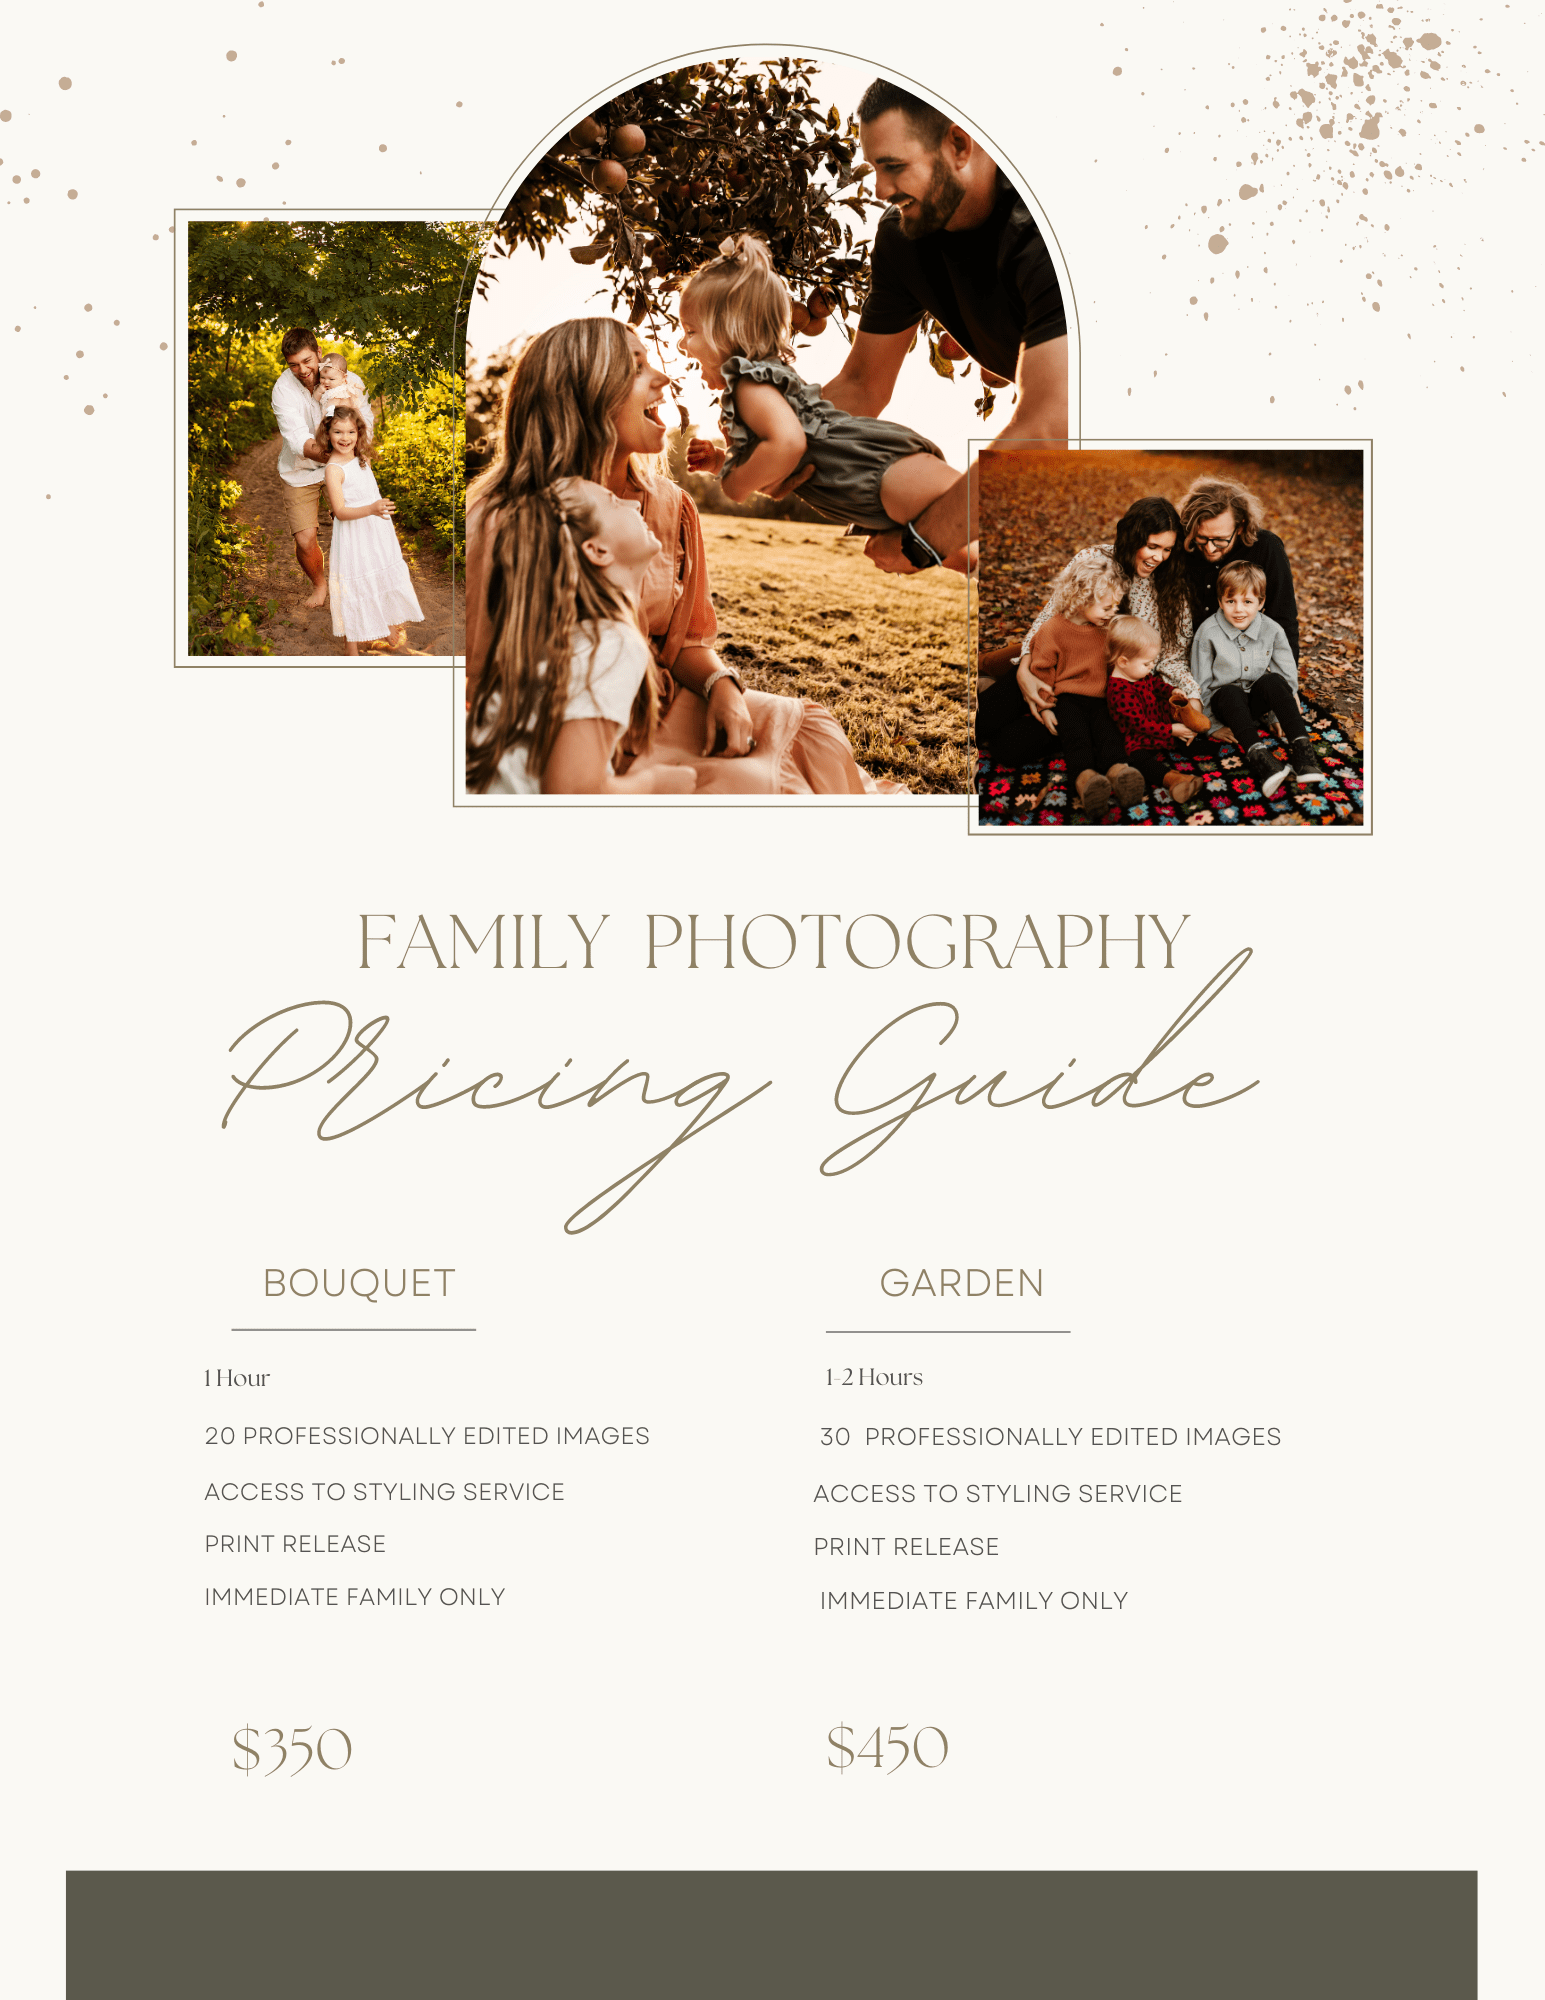 Family pricing Guides for Maria Angeles Photography in Erie, Pa